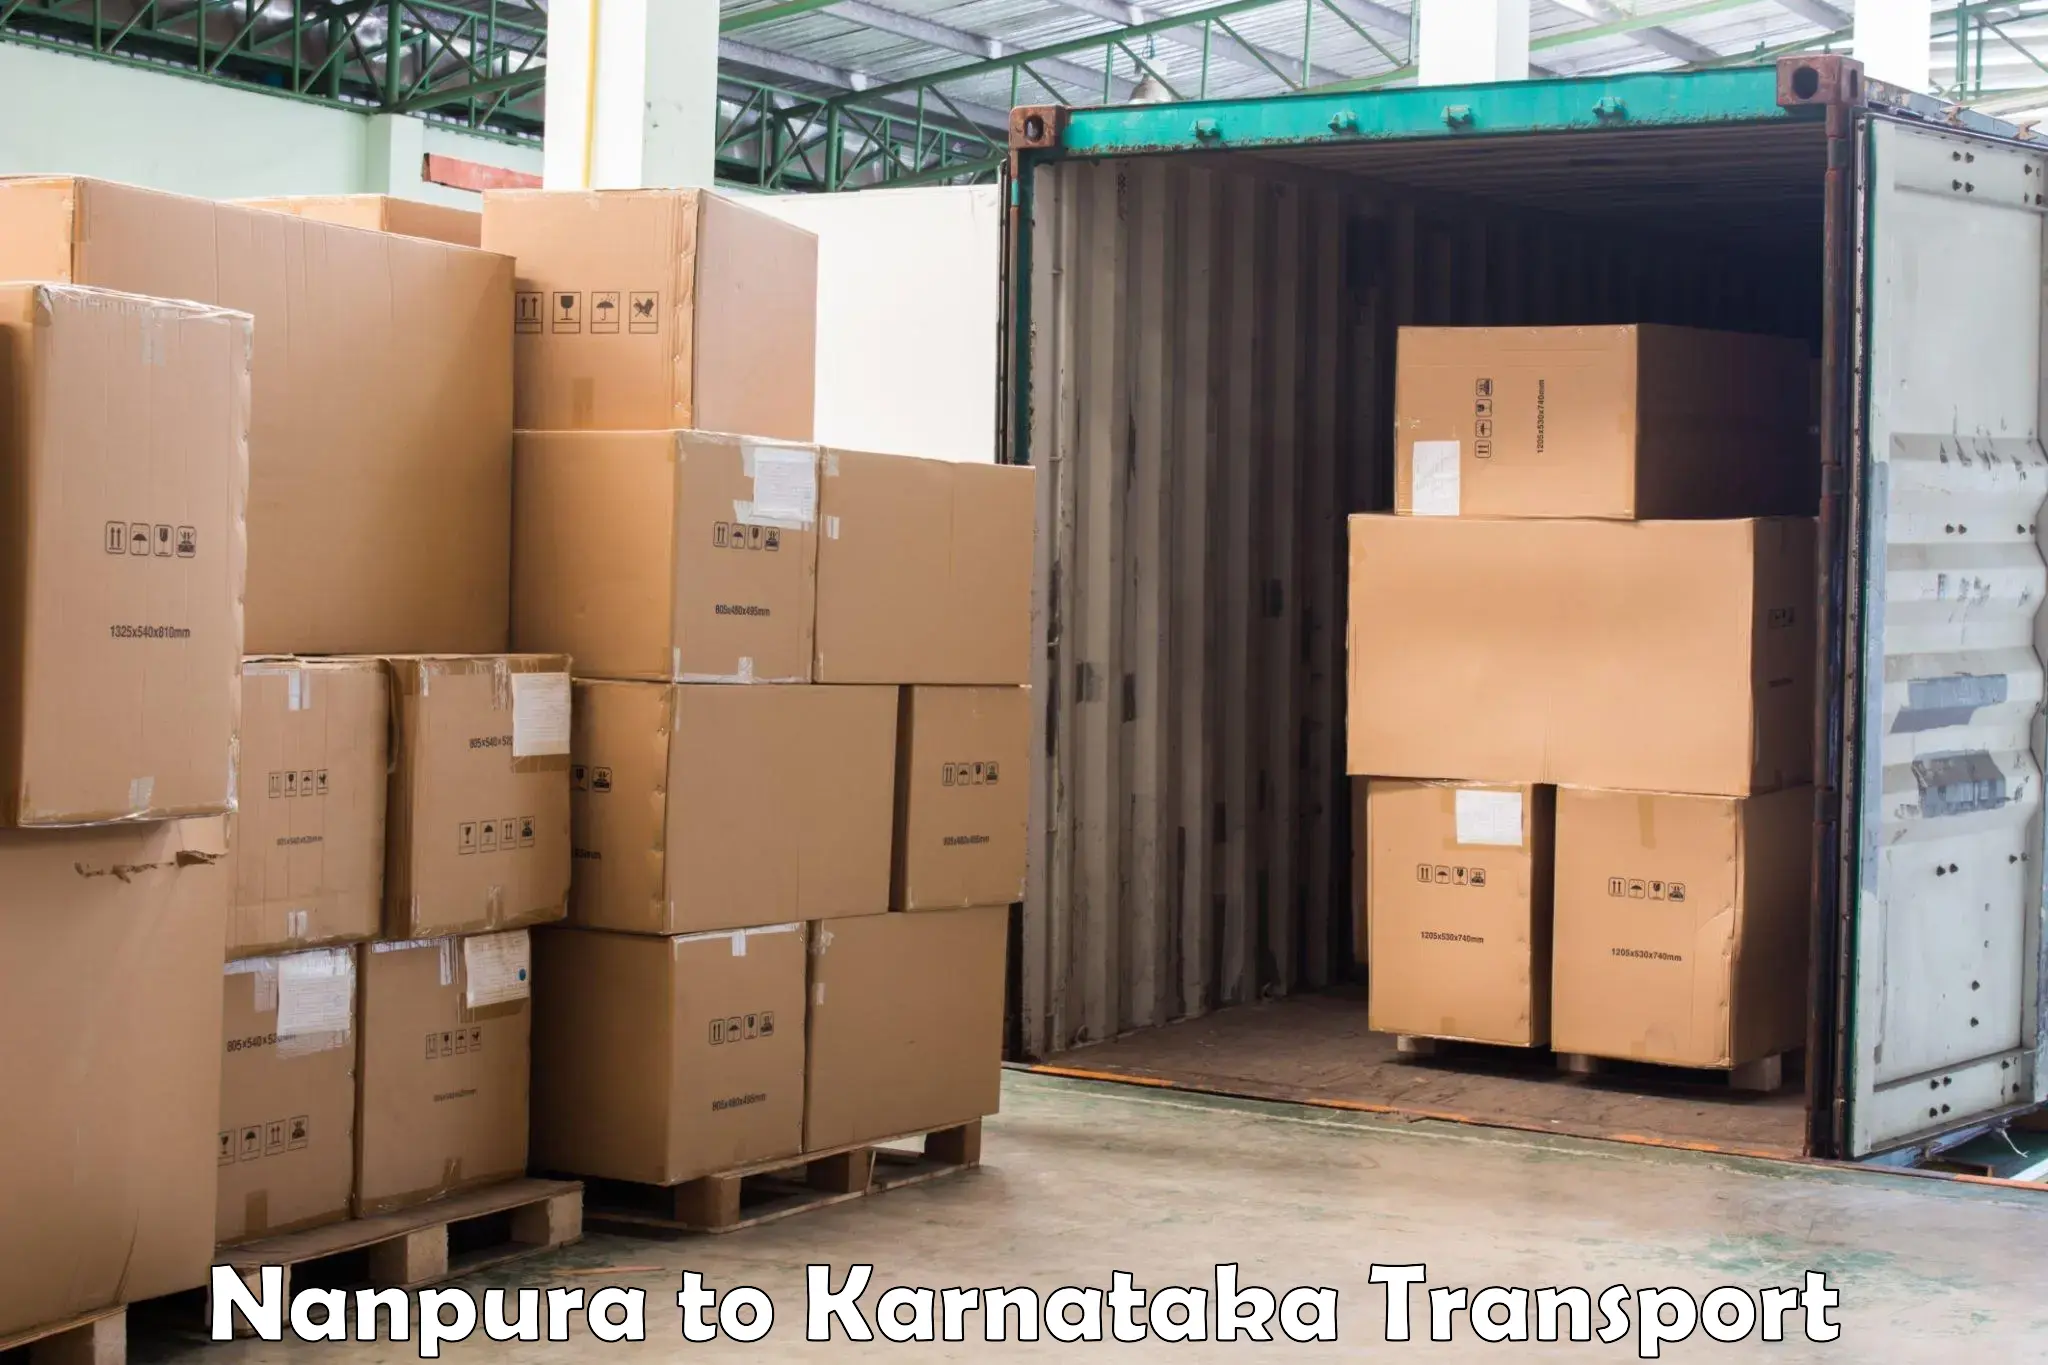 Truck transport companies in India Nanpura to Chikkamagalur